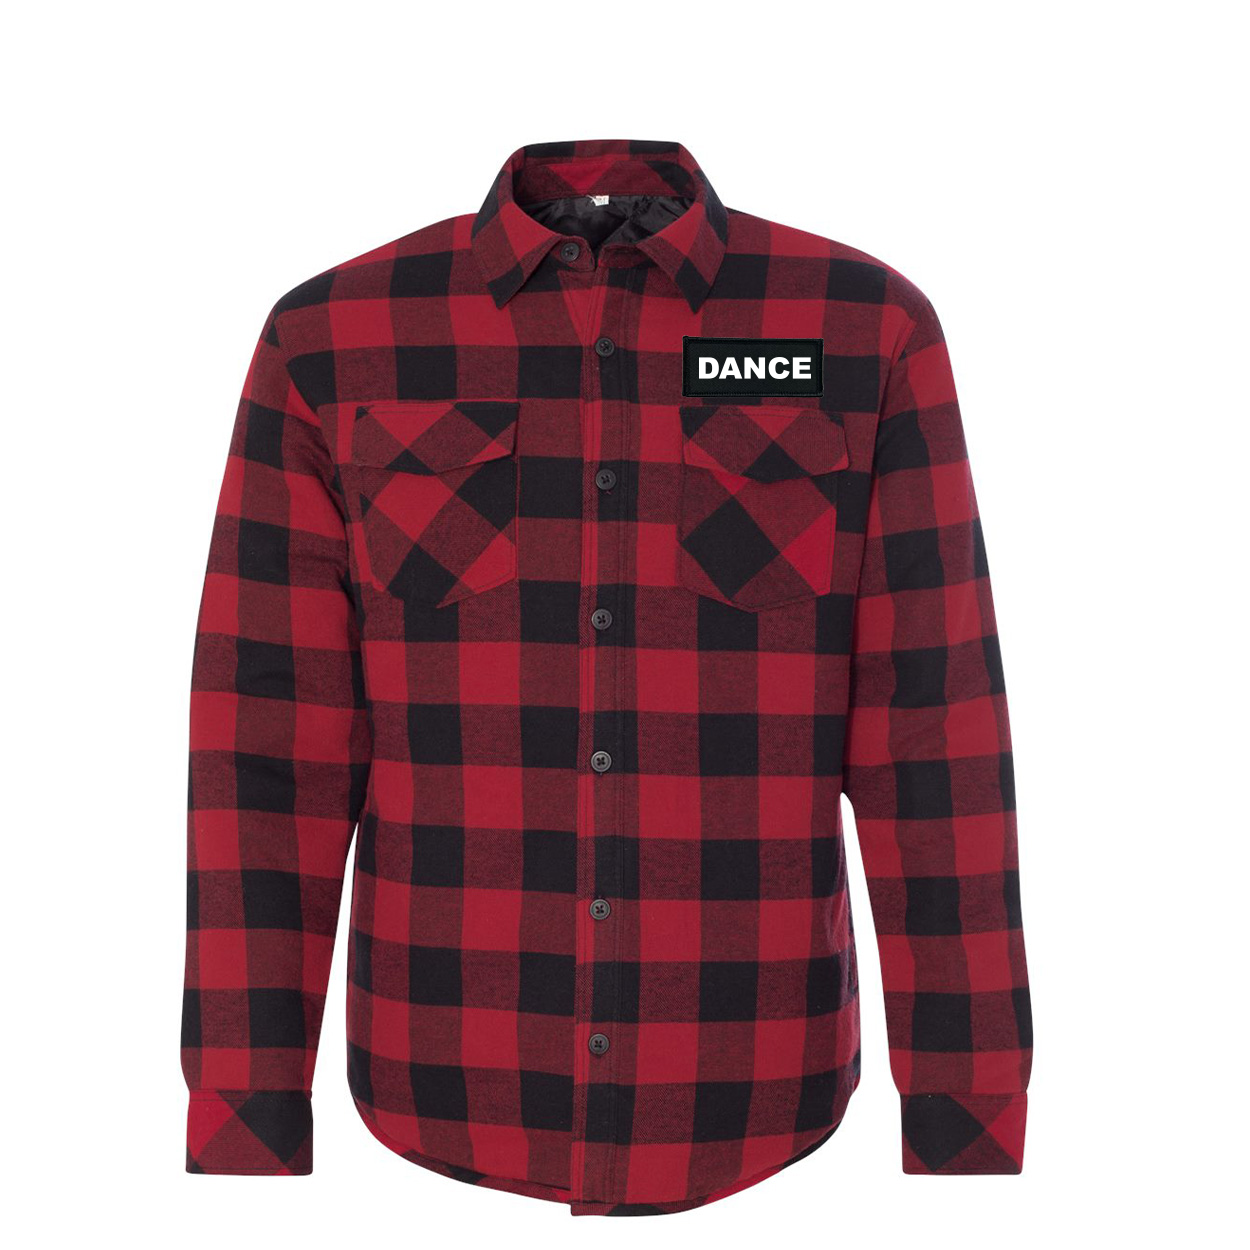 Dance Brand Logo Classic Unisex Woven Patch Quilted Button Flannel Jacket Red/Black Buffalo (White Logo)